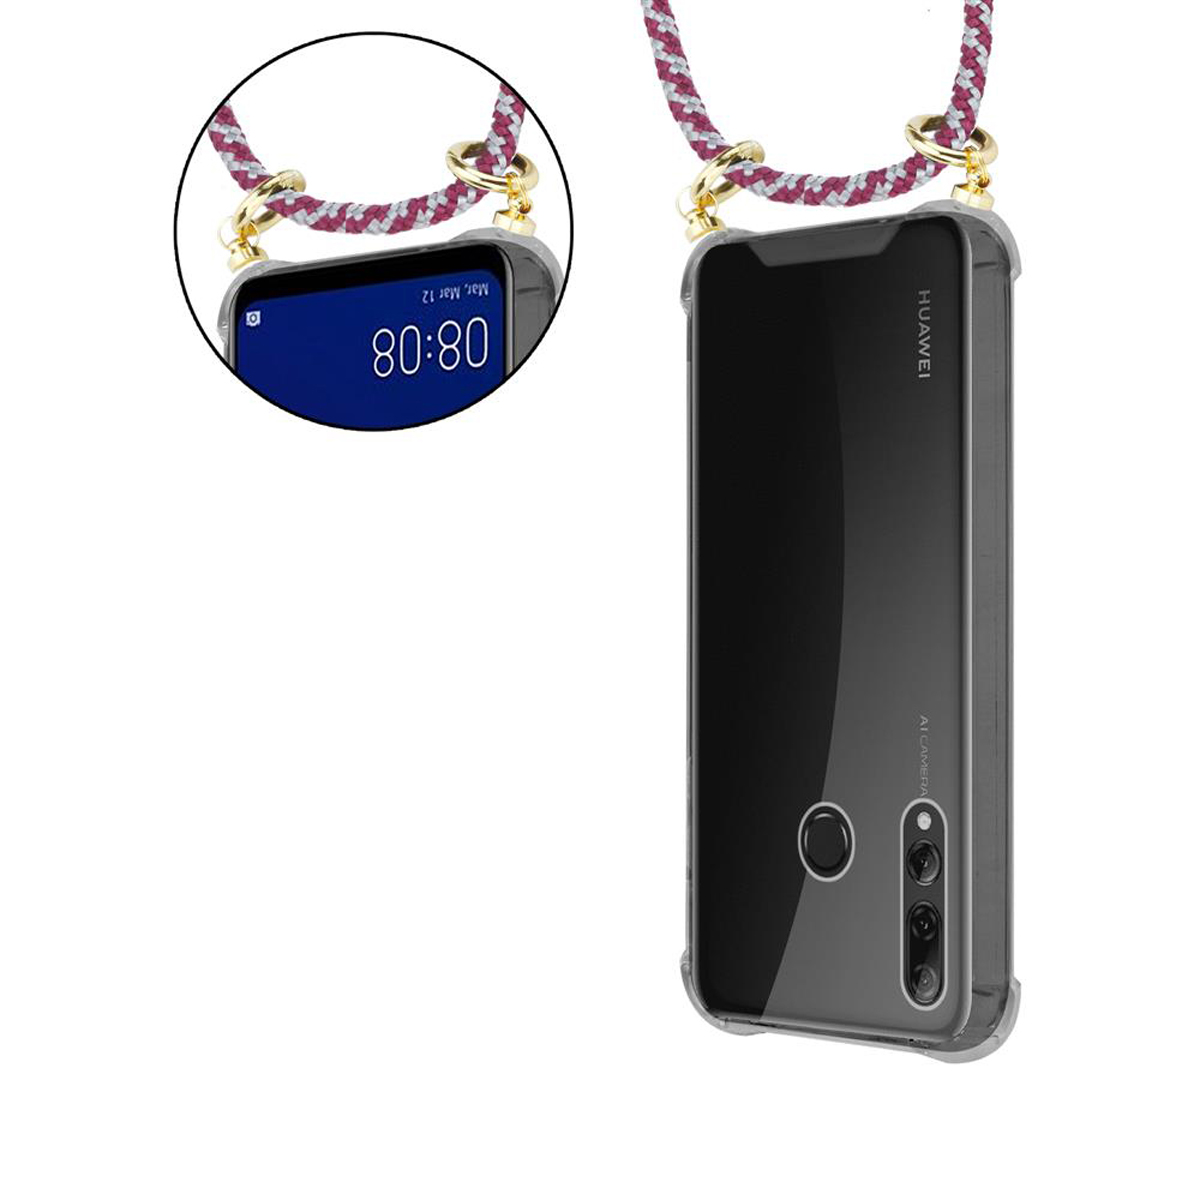 Kette Handy Gold mit PLUS abnehmbarer ROT Huawei, 2019, SMART und Band Kordel Ringen, Backcover, P CADORABO Hülle, WEIß